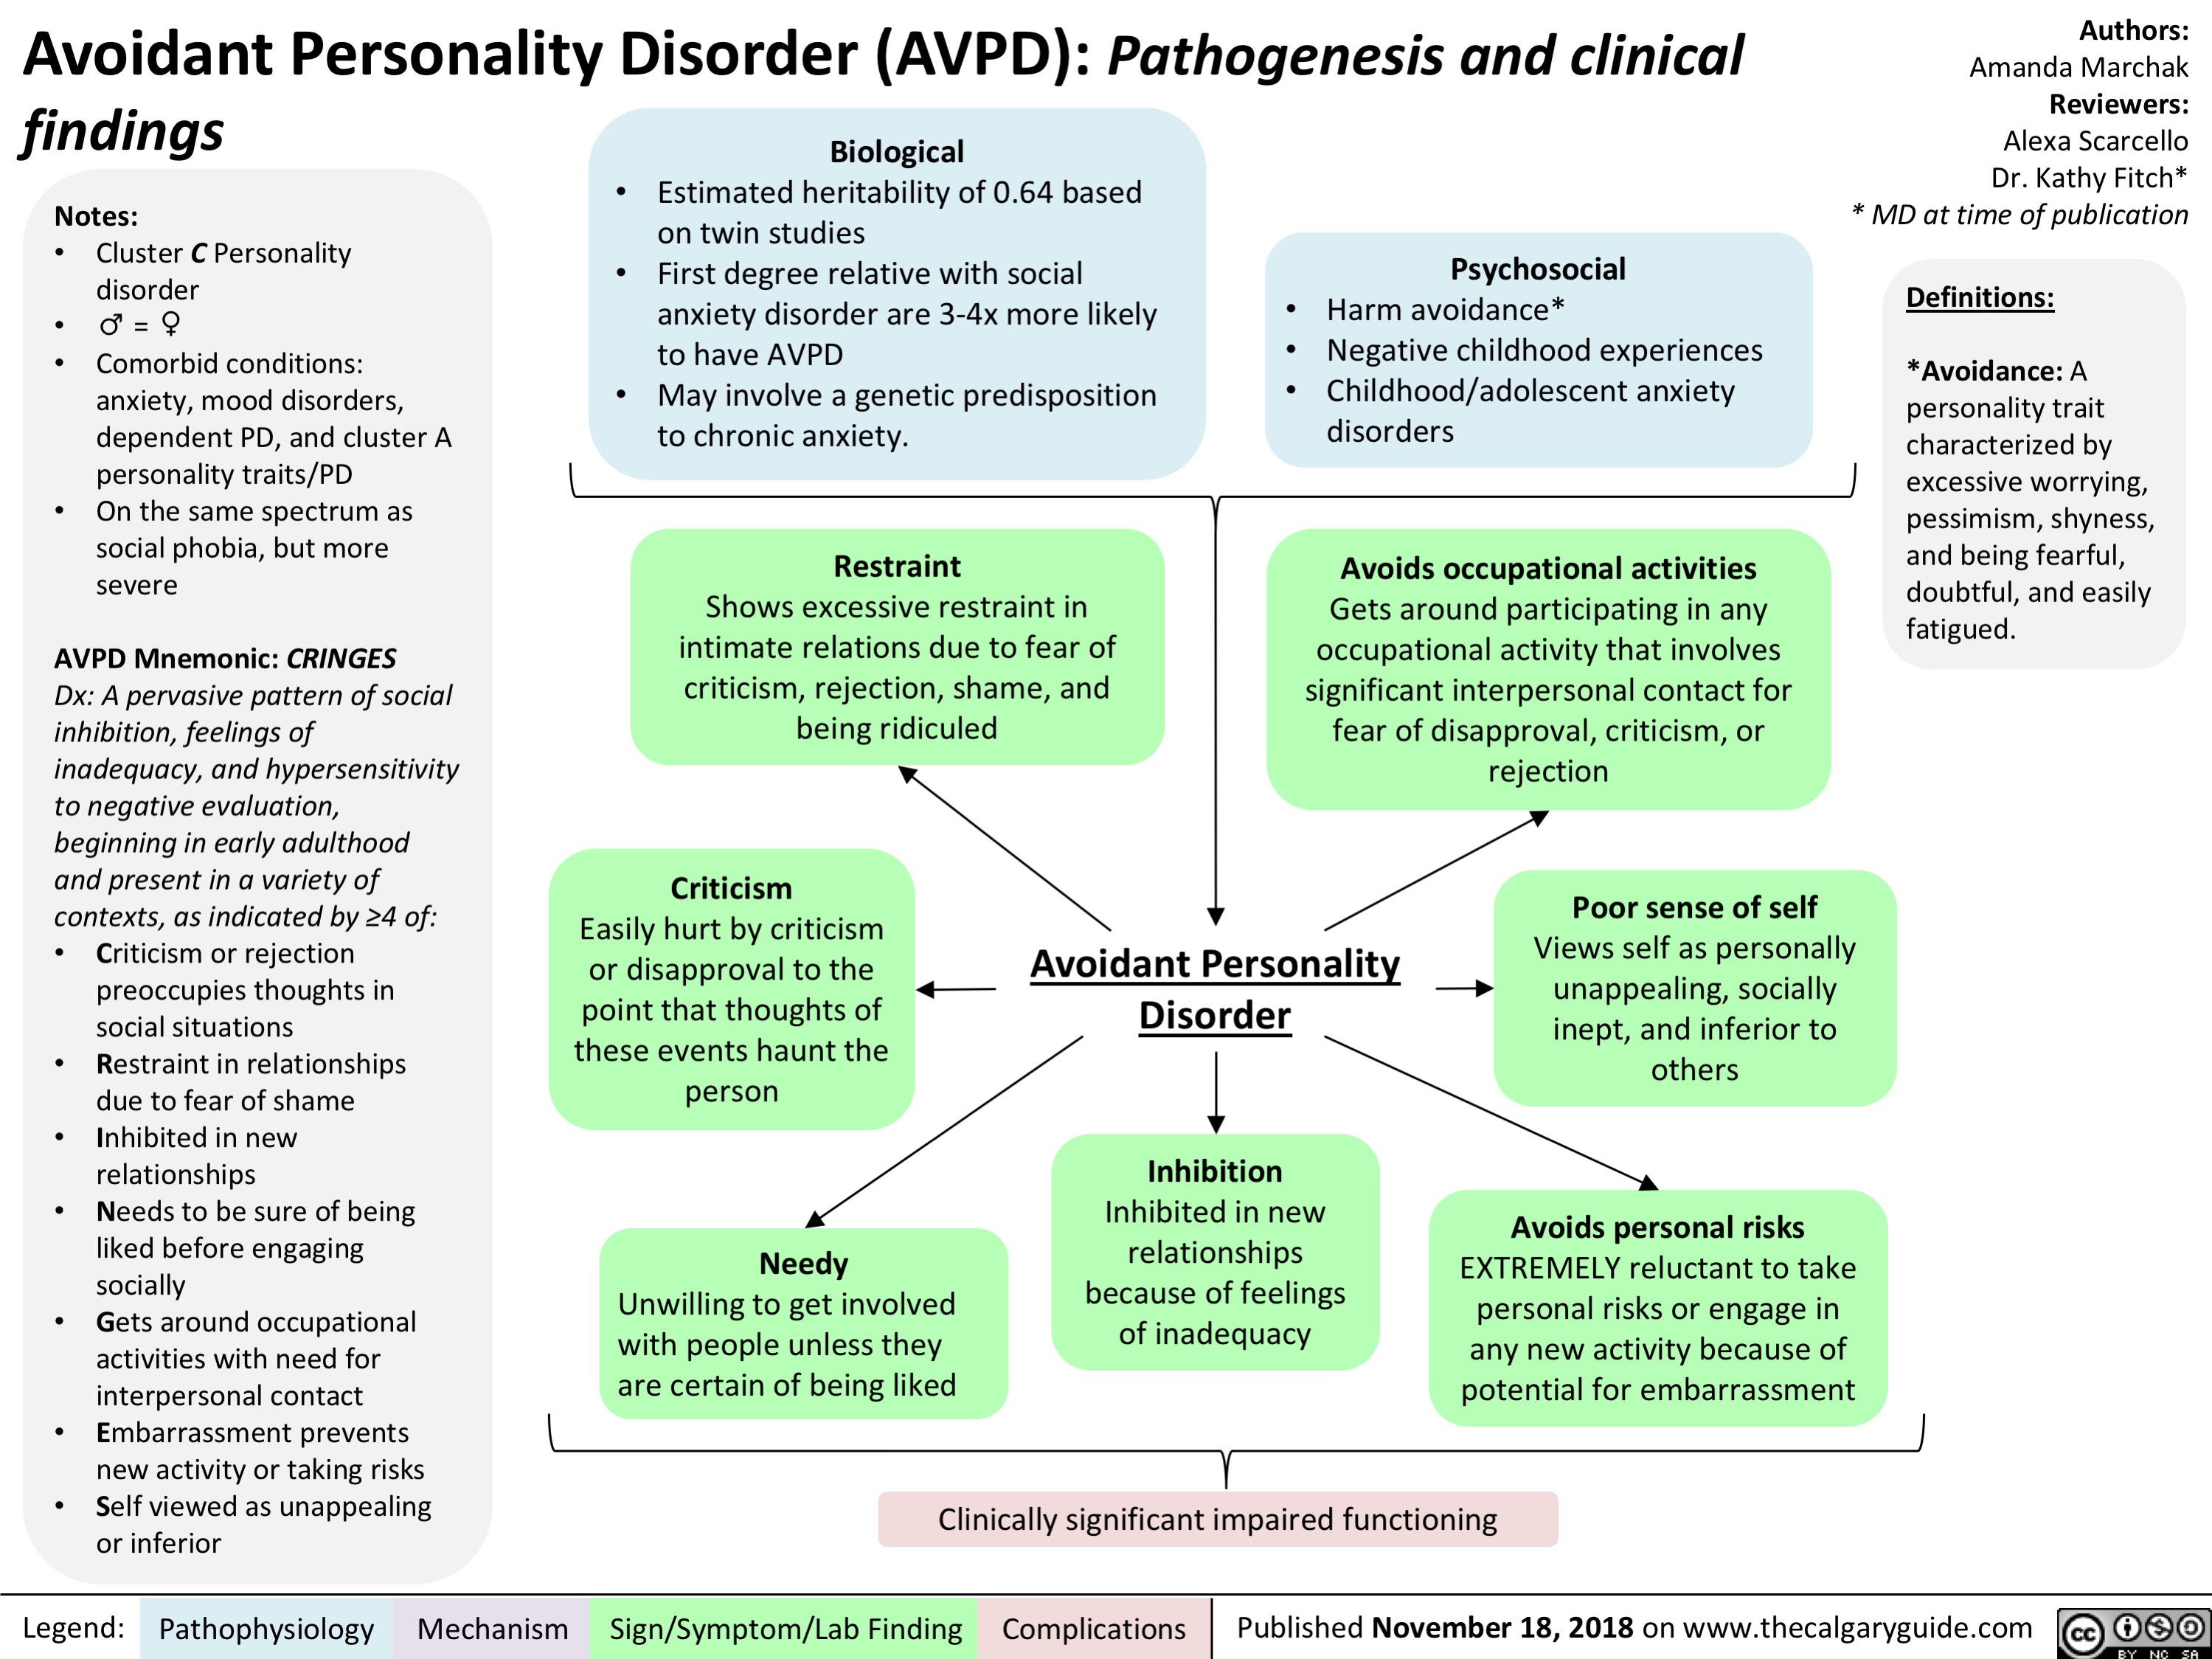 What is avoidant personality disorder